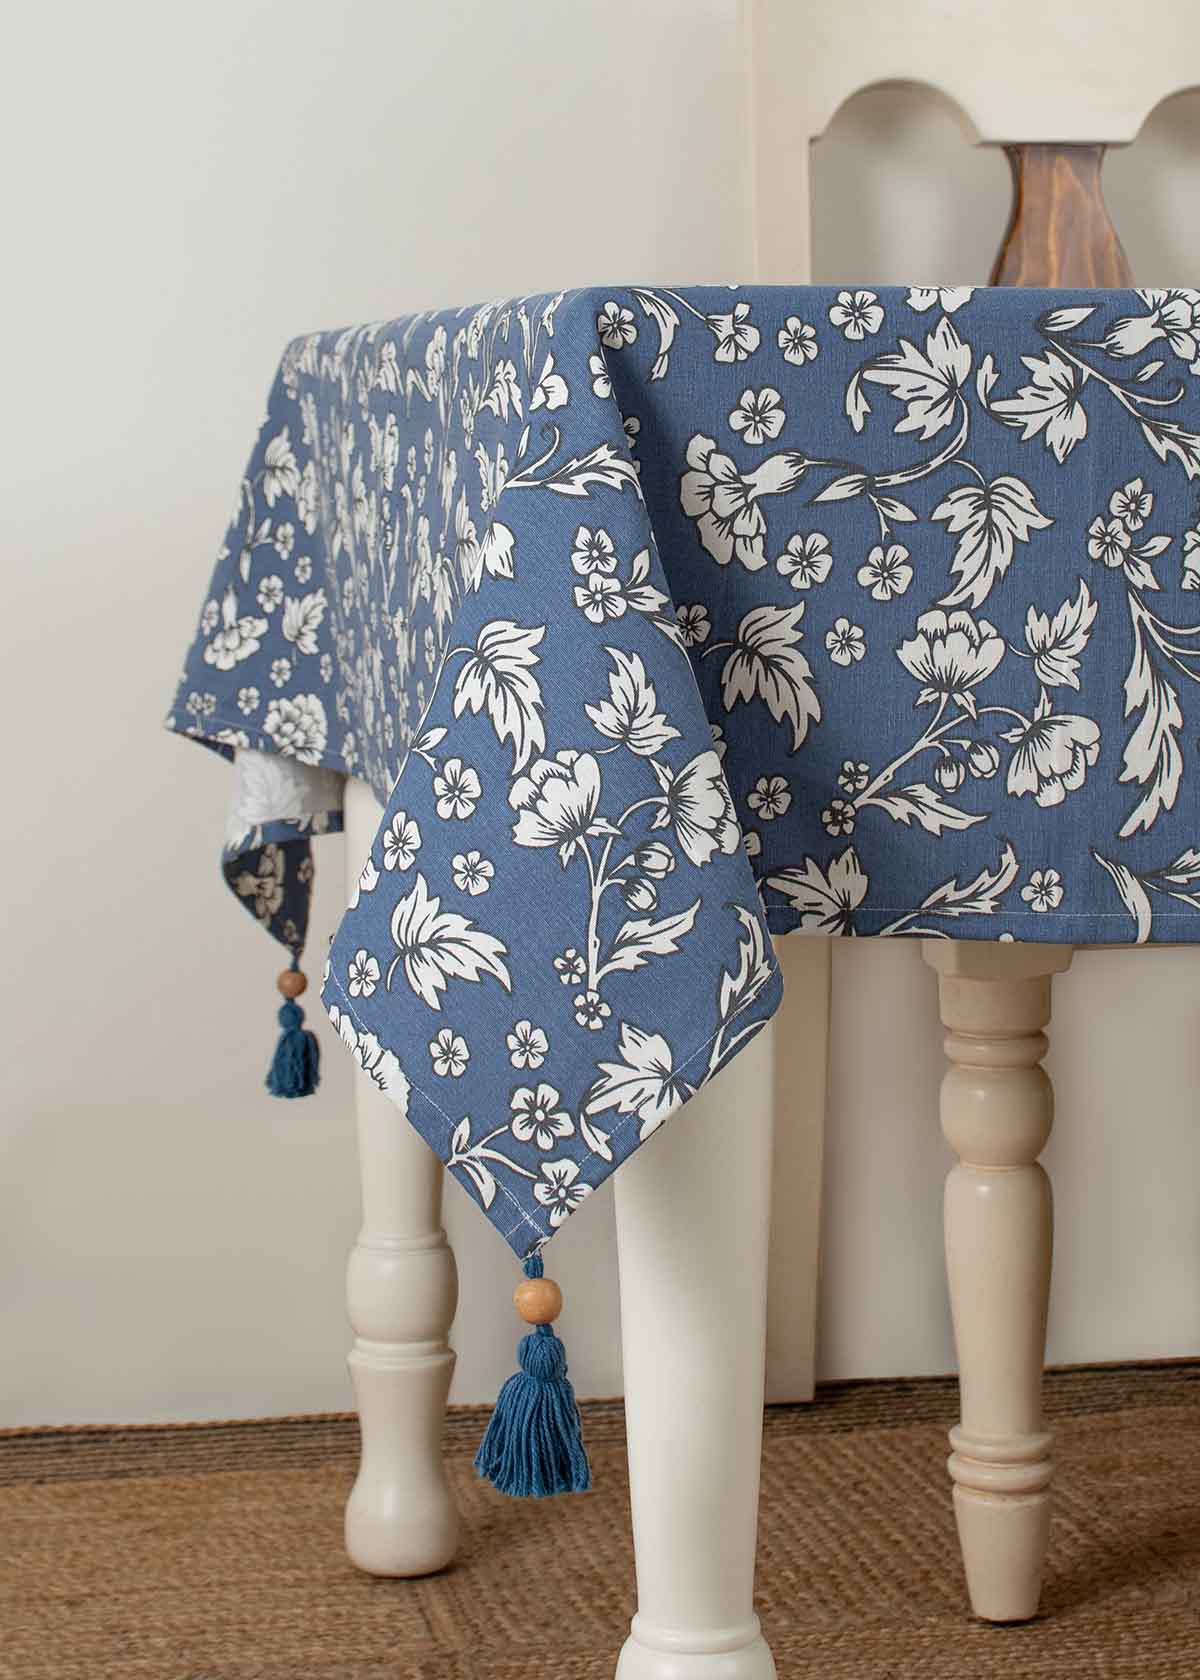 Marigold Printed 100% cotton floral table cloth for 4 seater or 6 seater dining - Royal Blue